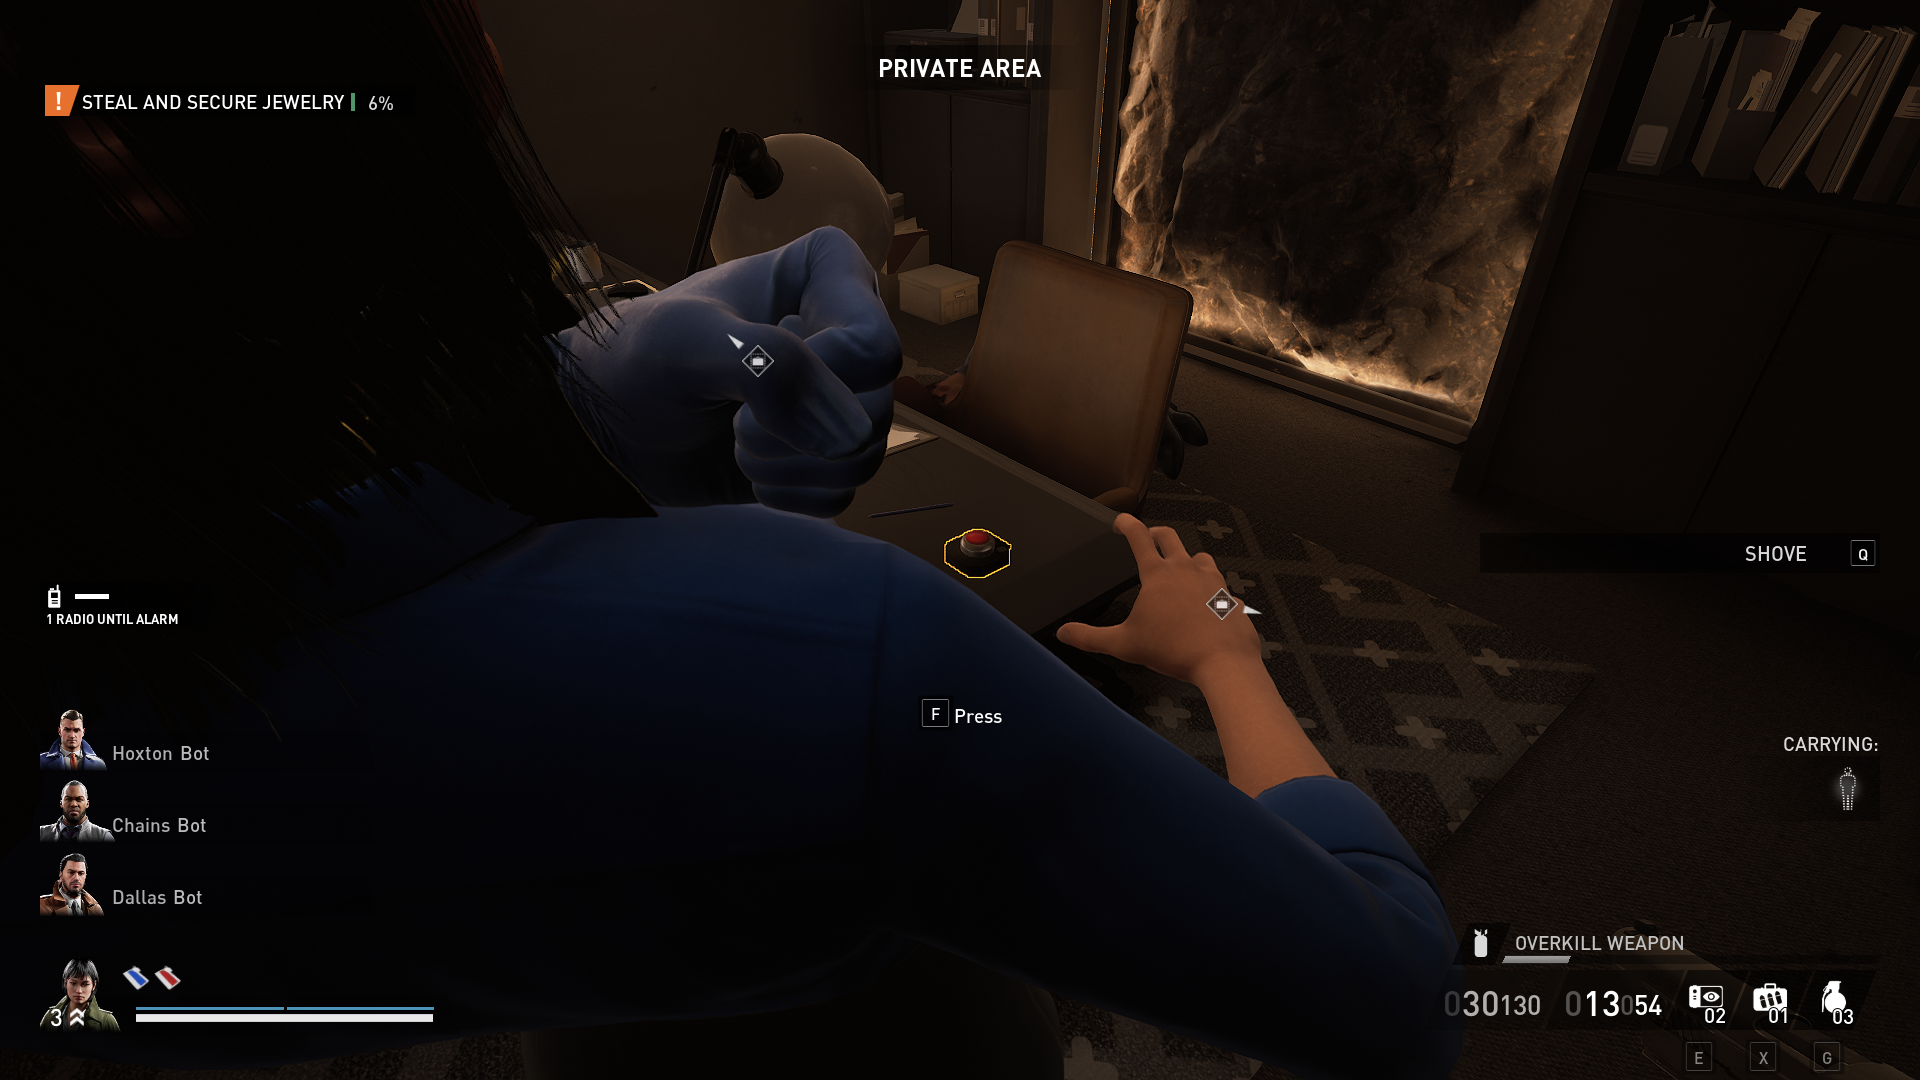 Displays the button on the manager's desk during Dirty Ice (Payday 3)